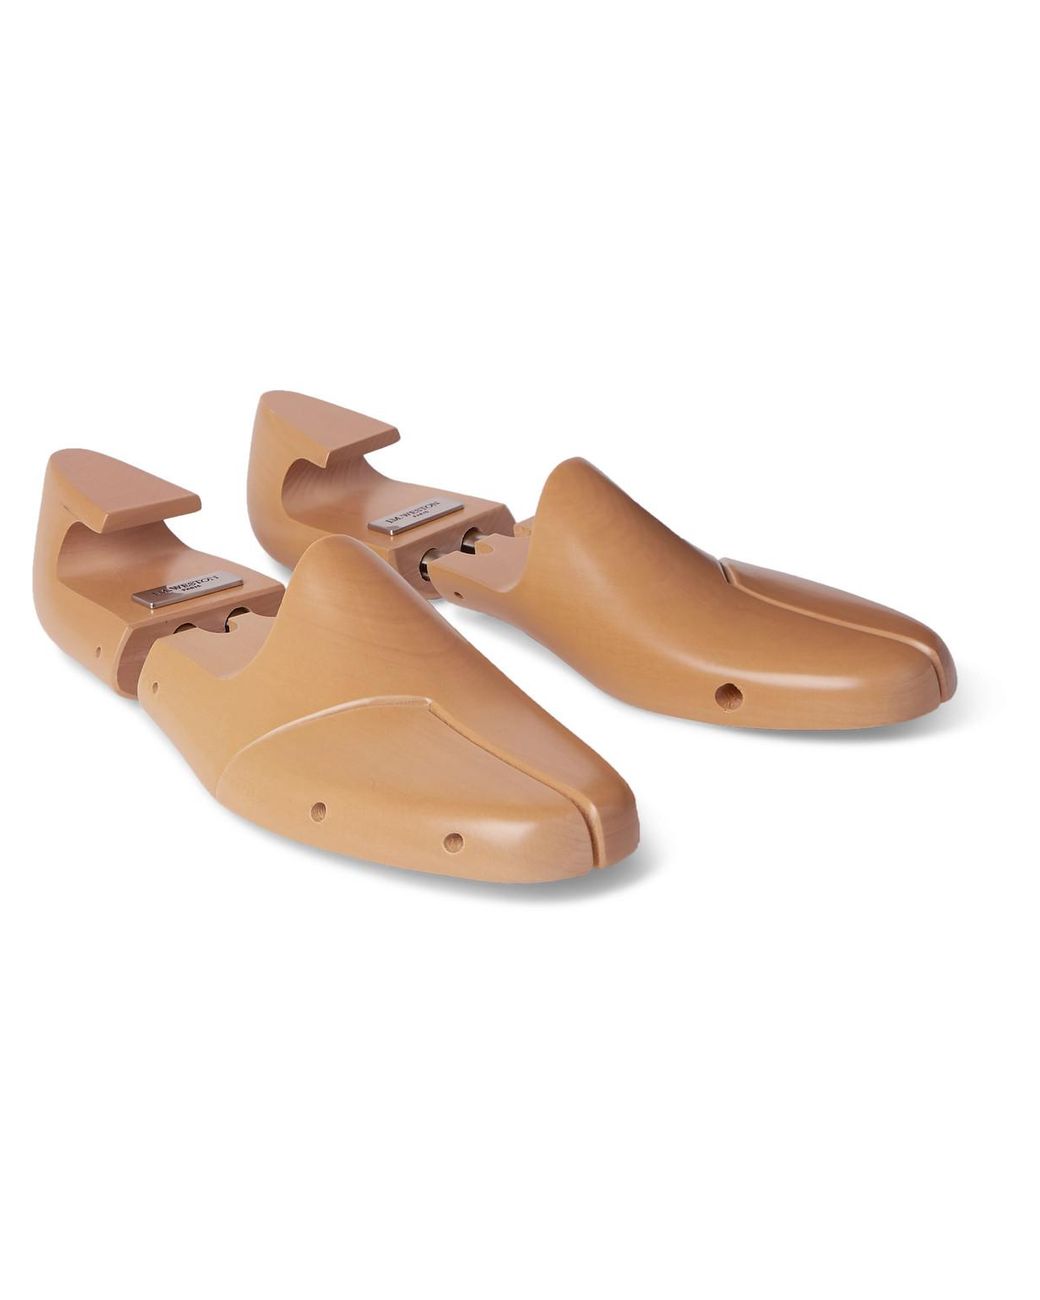 TRICKERS // Wooden Shoe Trees // NEW!!!